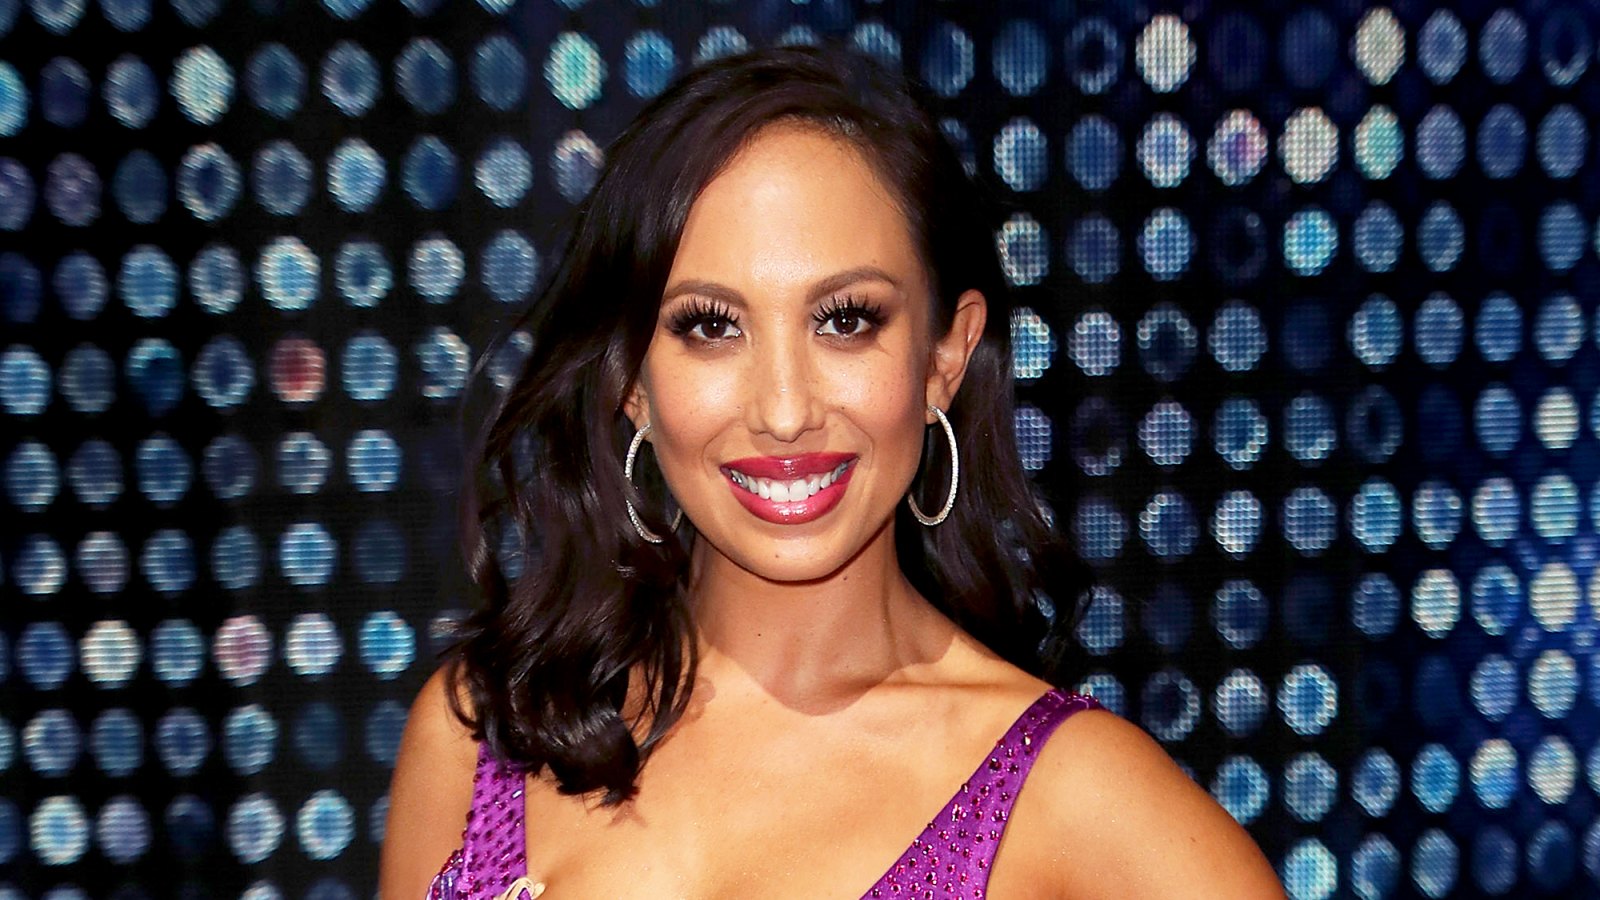 Cheryl Burke on ‘Dancing With The Stars‘